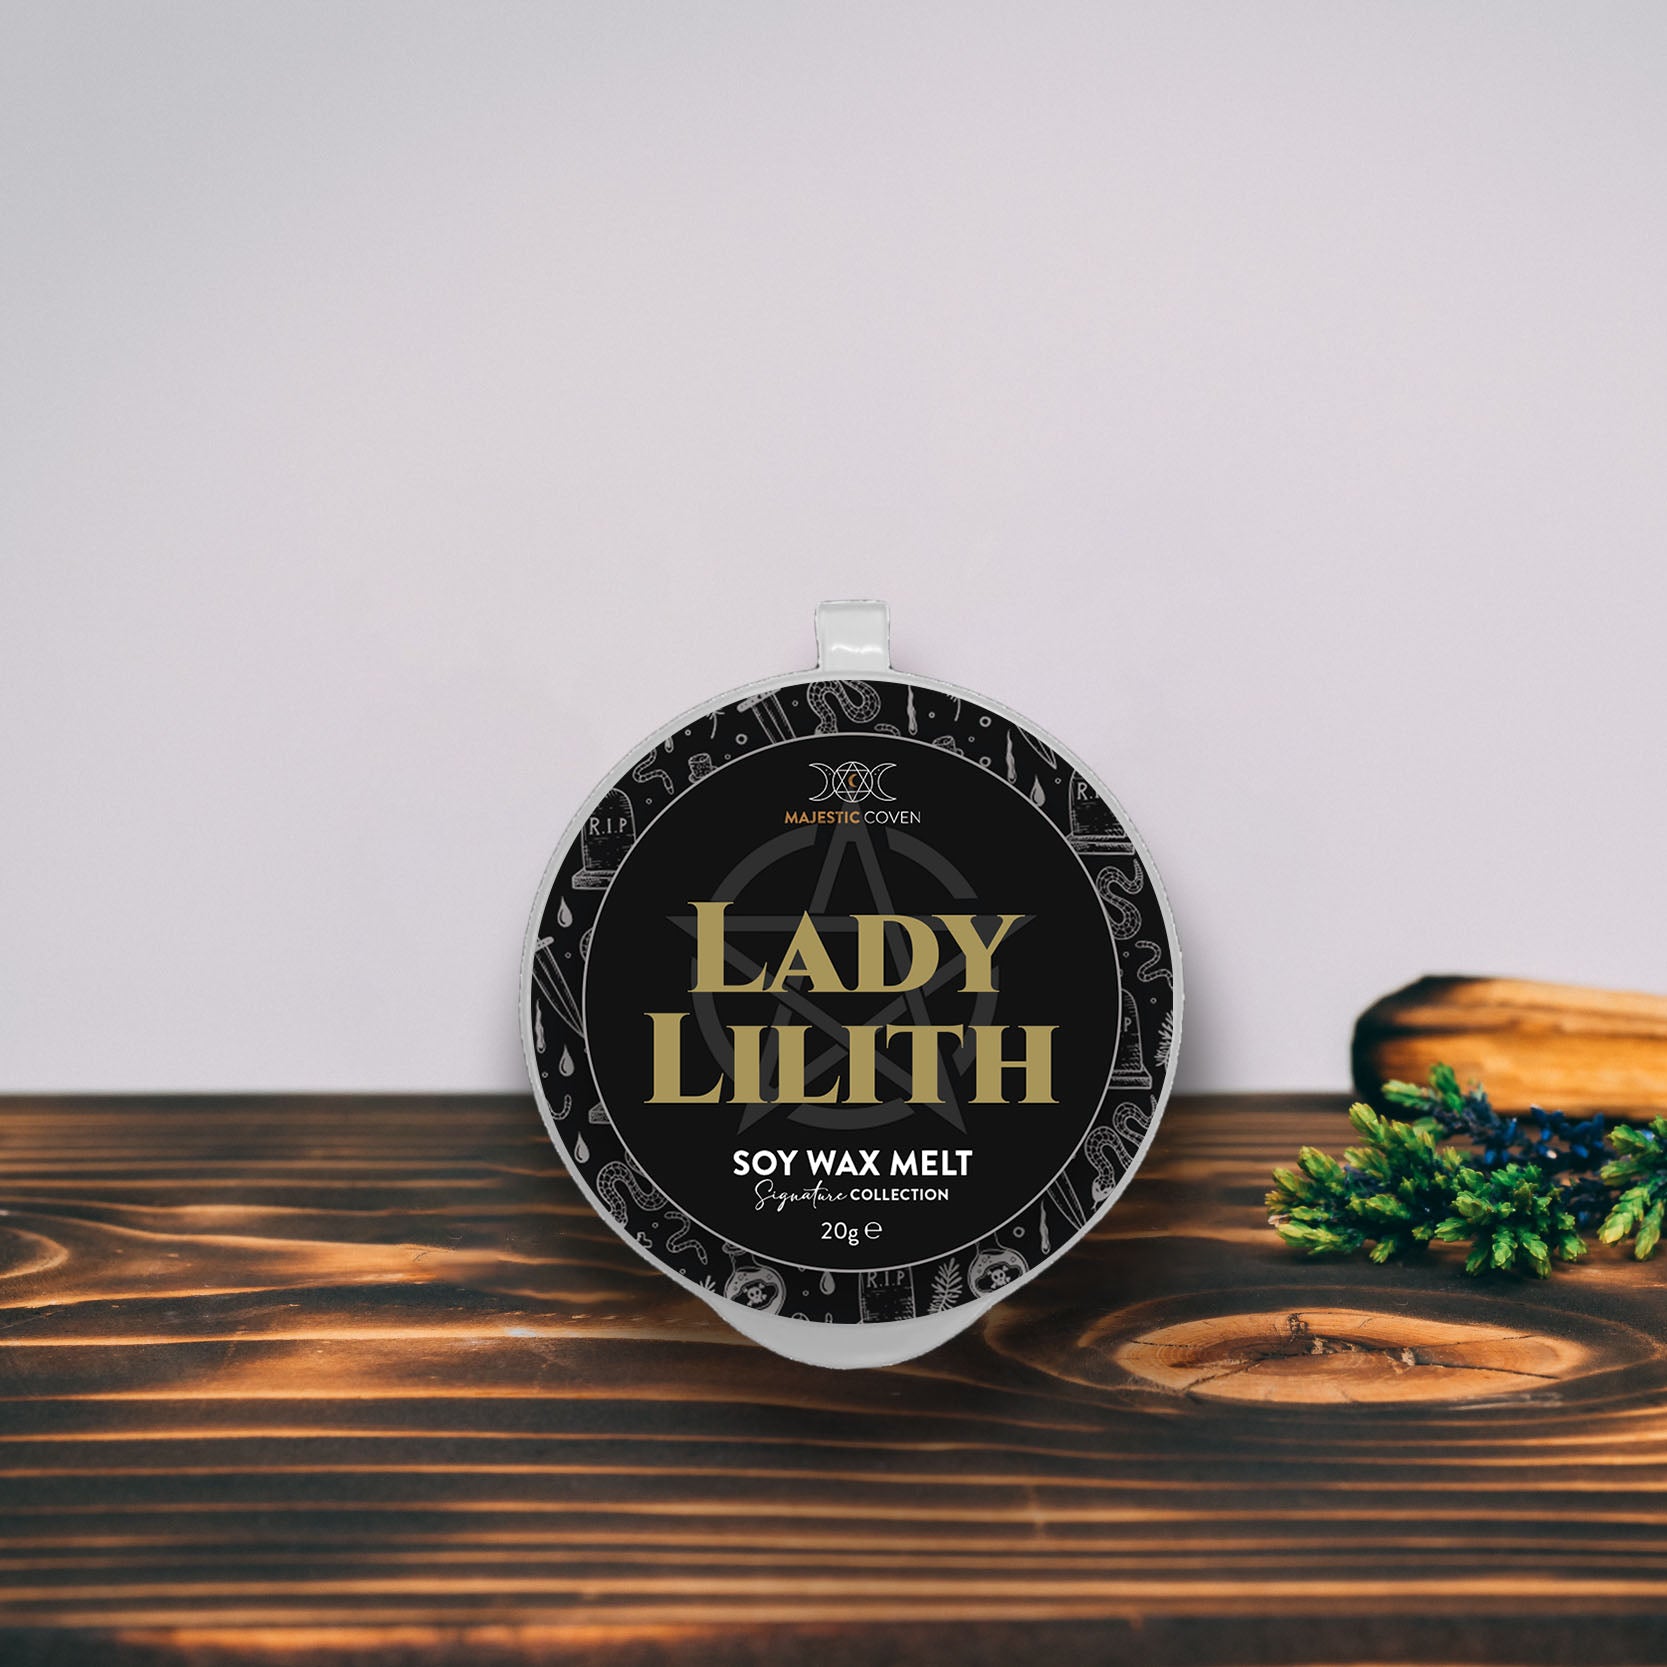 Lady Lilith - Soy Wax Melt 20g Sample Pot Majestic Coven